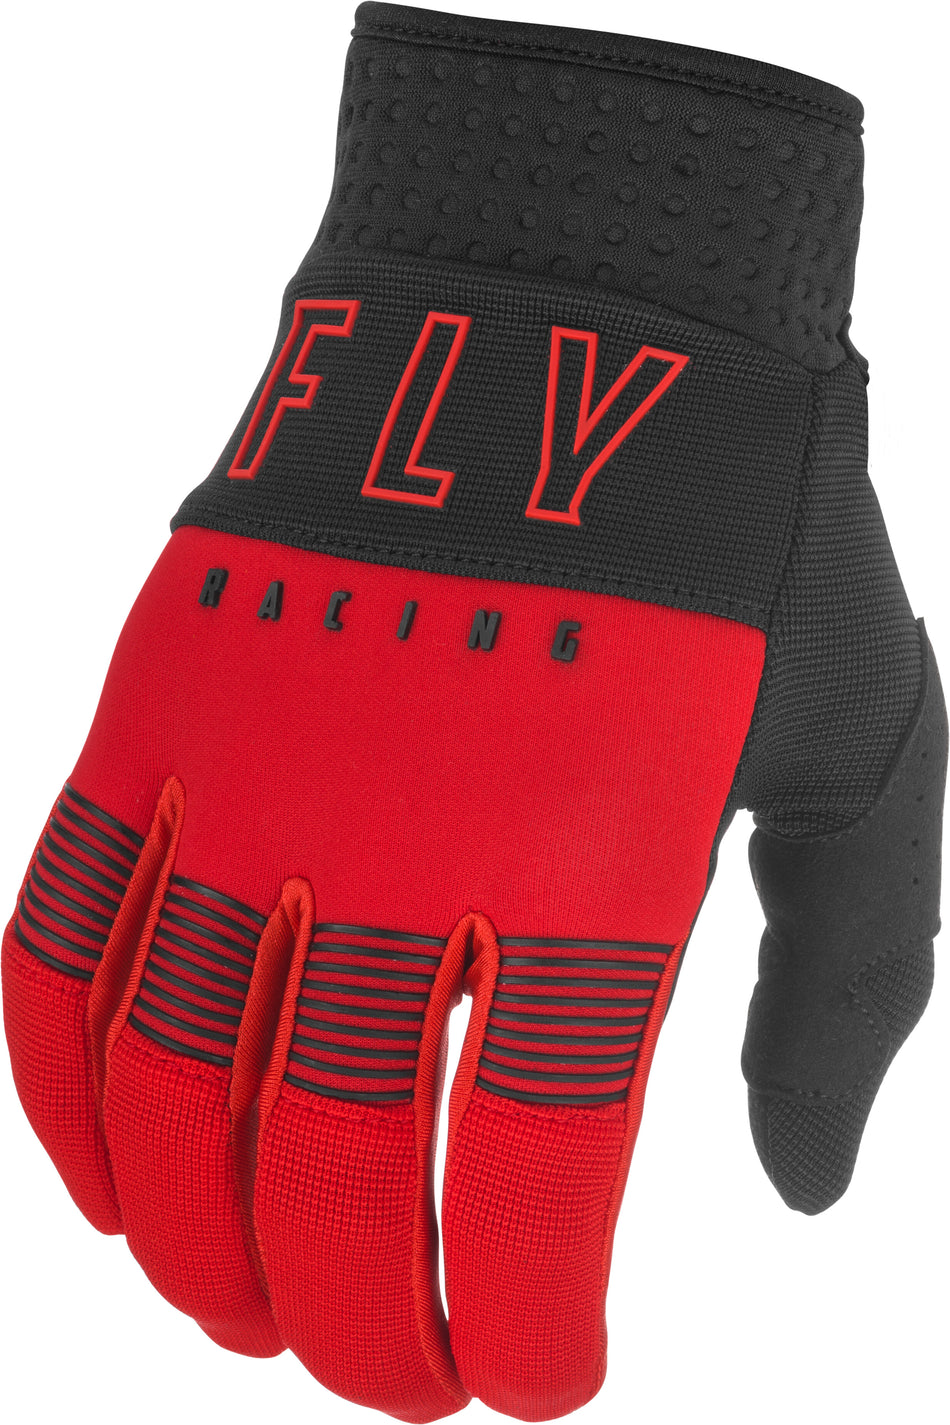 FLY RACING F-16 Gloves Red/Black Sz 11 374-91211